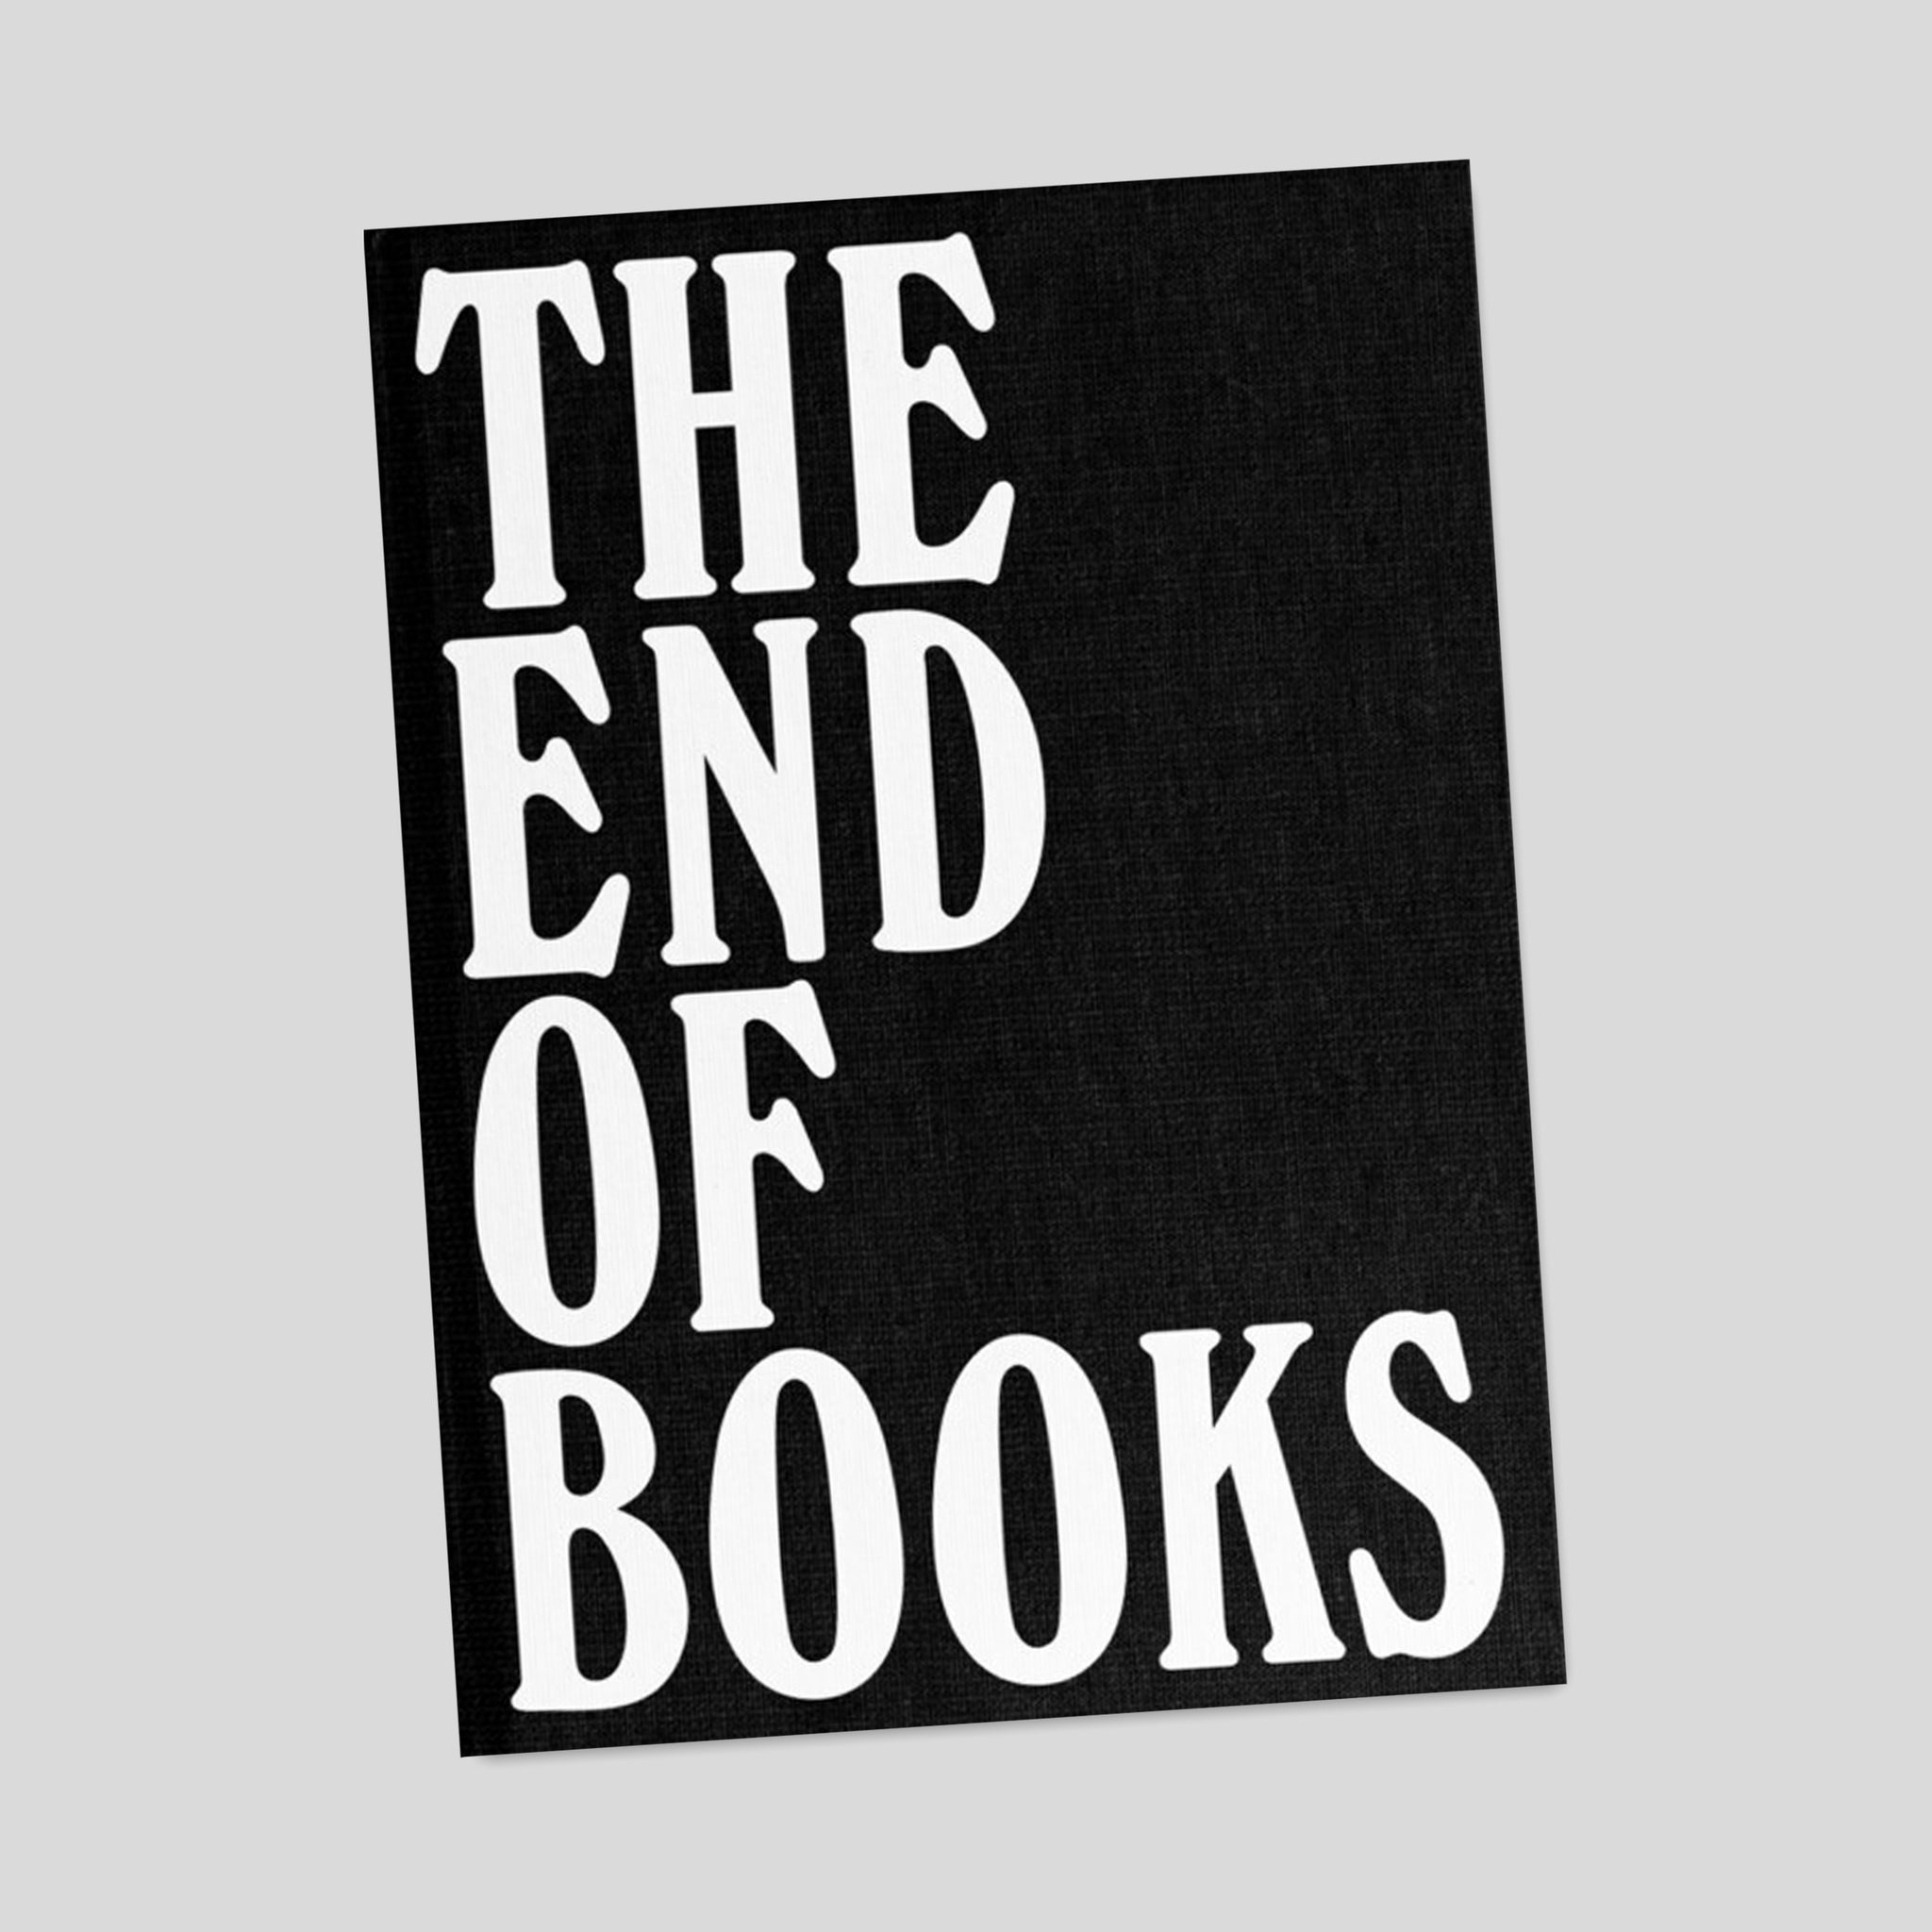 Vieceli & Cremers — The end of books